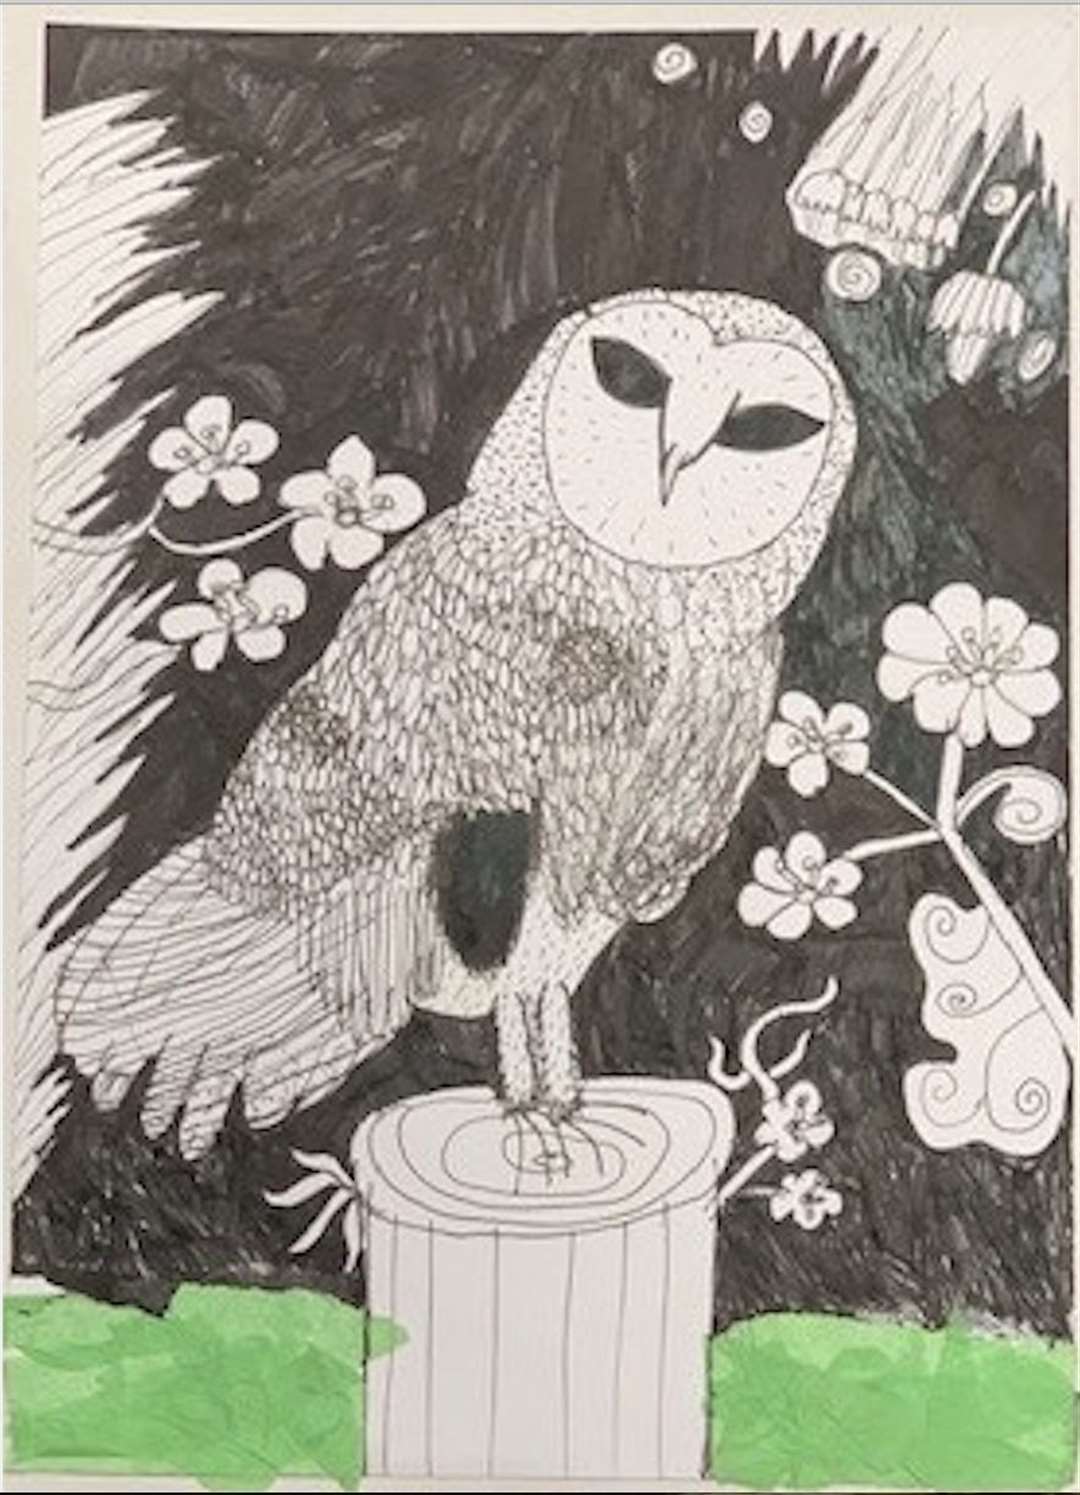 Ruby Hanington from Drumblade Primary was the overall winner in the primary schools’ competition with her drawning of an owl.